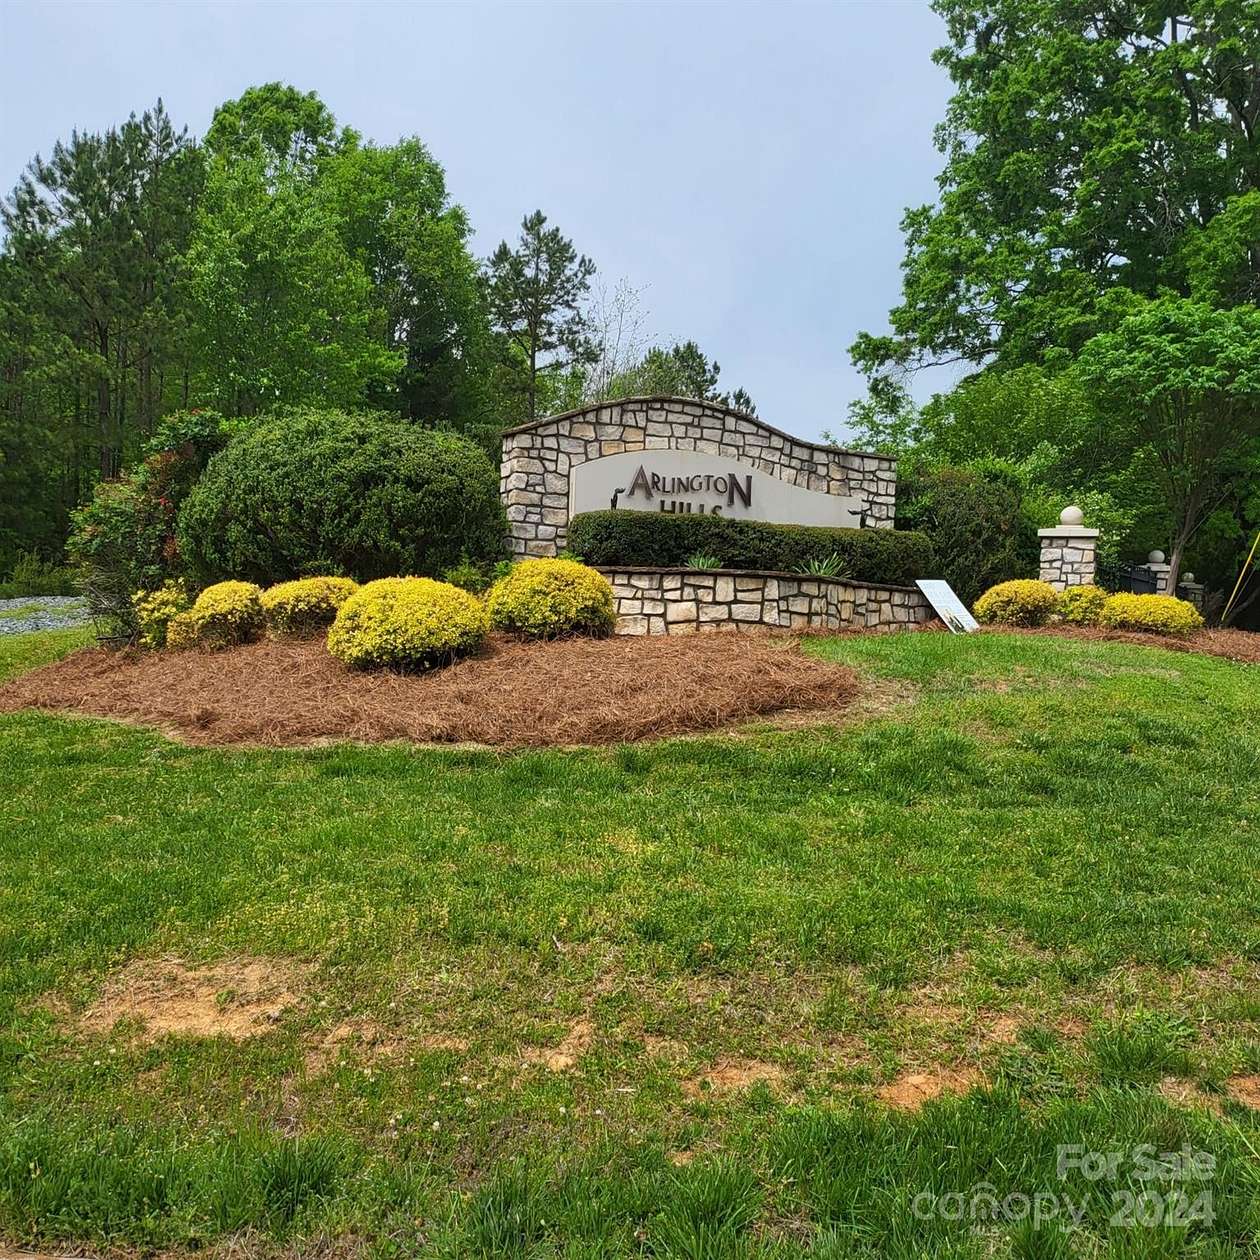 2.9 Acres of Land for Sale in Charlotte, North Carolina